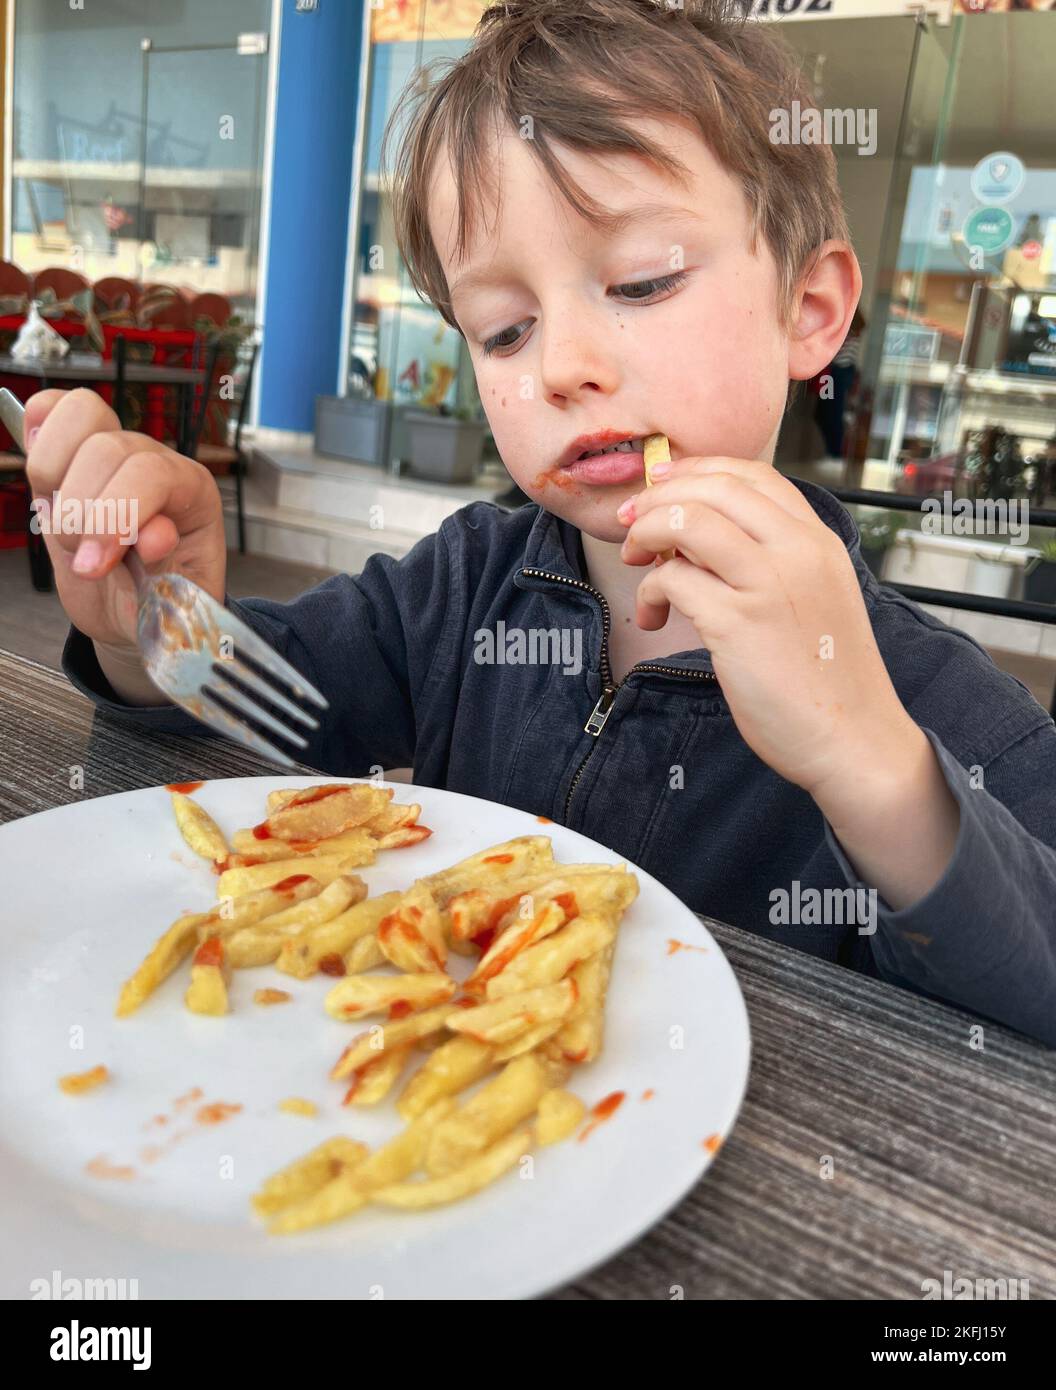 Caucasian cute boy holding fork and eating french fries with hand at table in fast food restaurant Stock Photo